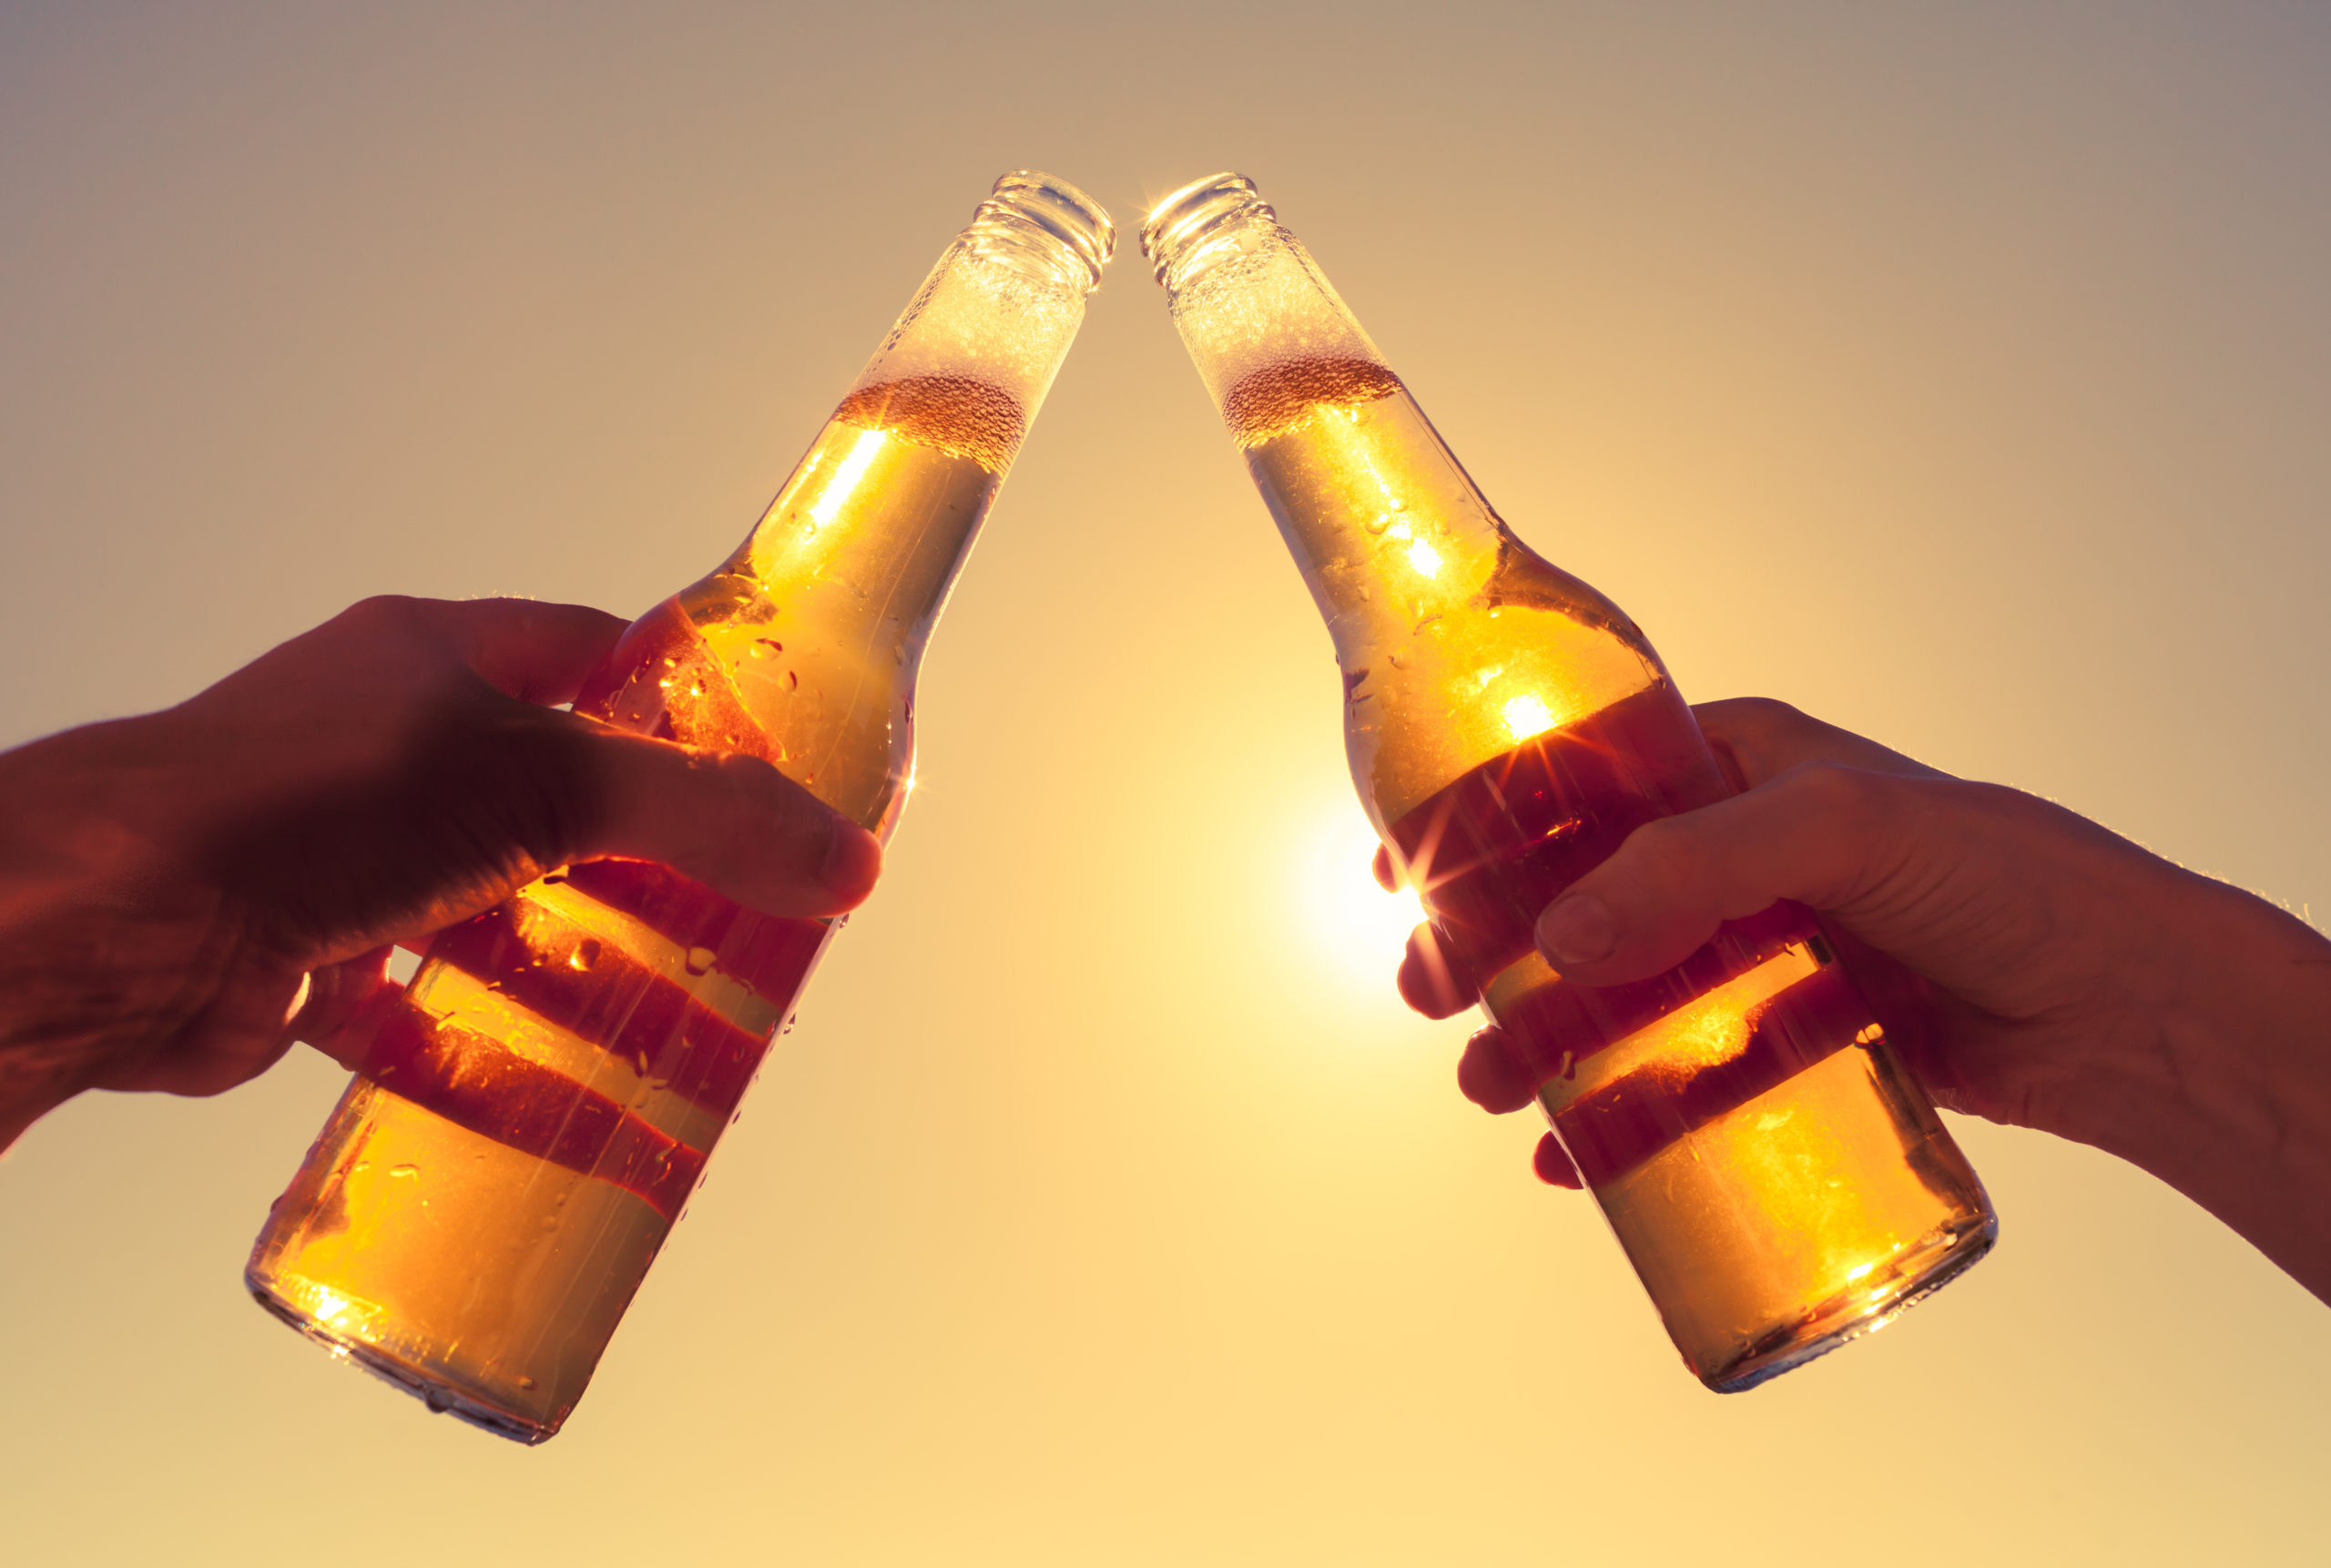 Non-Alcoholic Beer Sales Expected To Soar in 2020